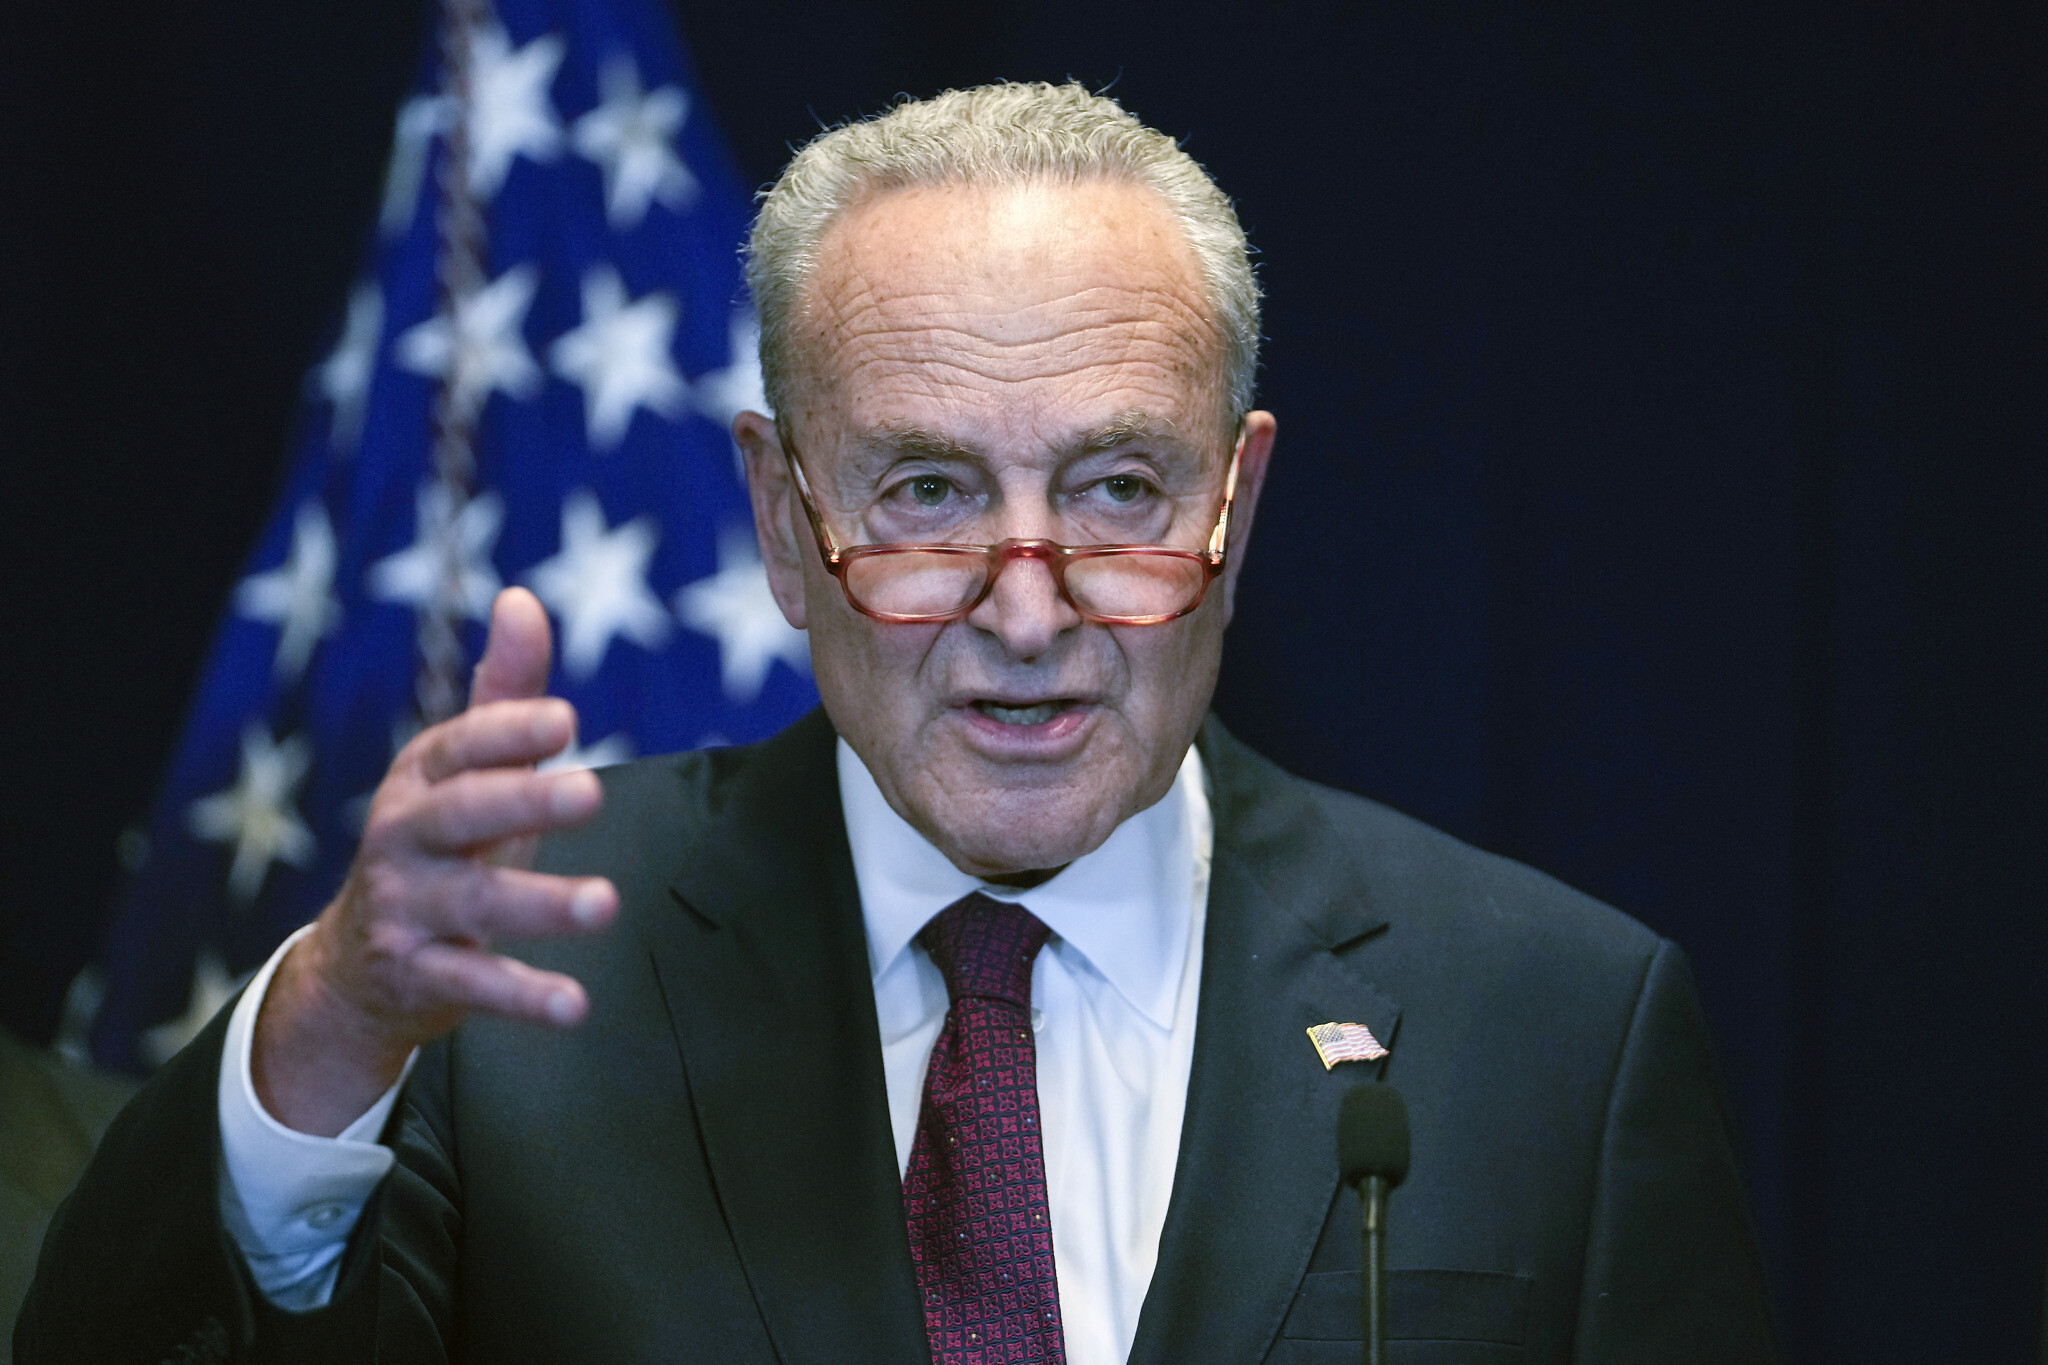 Senator Schumer Speaks Out Against Lawlessness in Columbia Protests